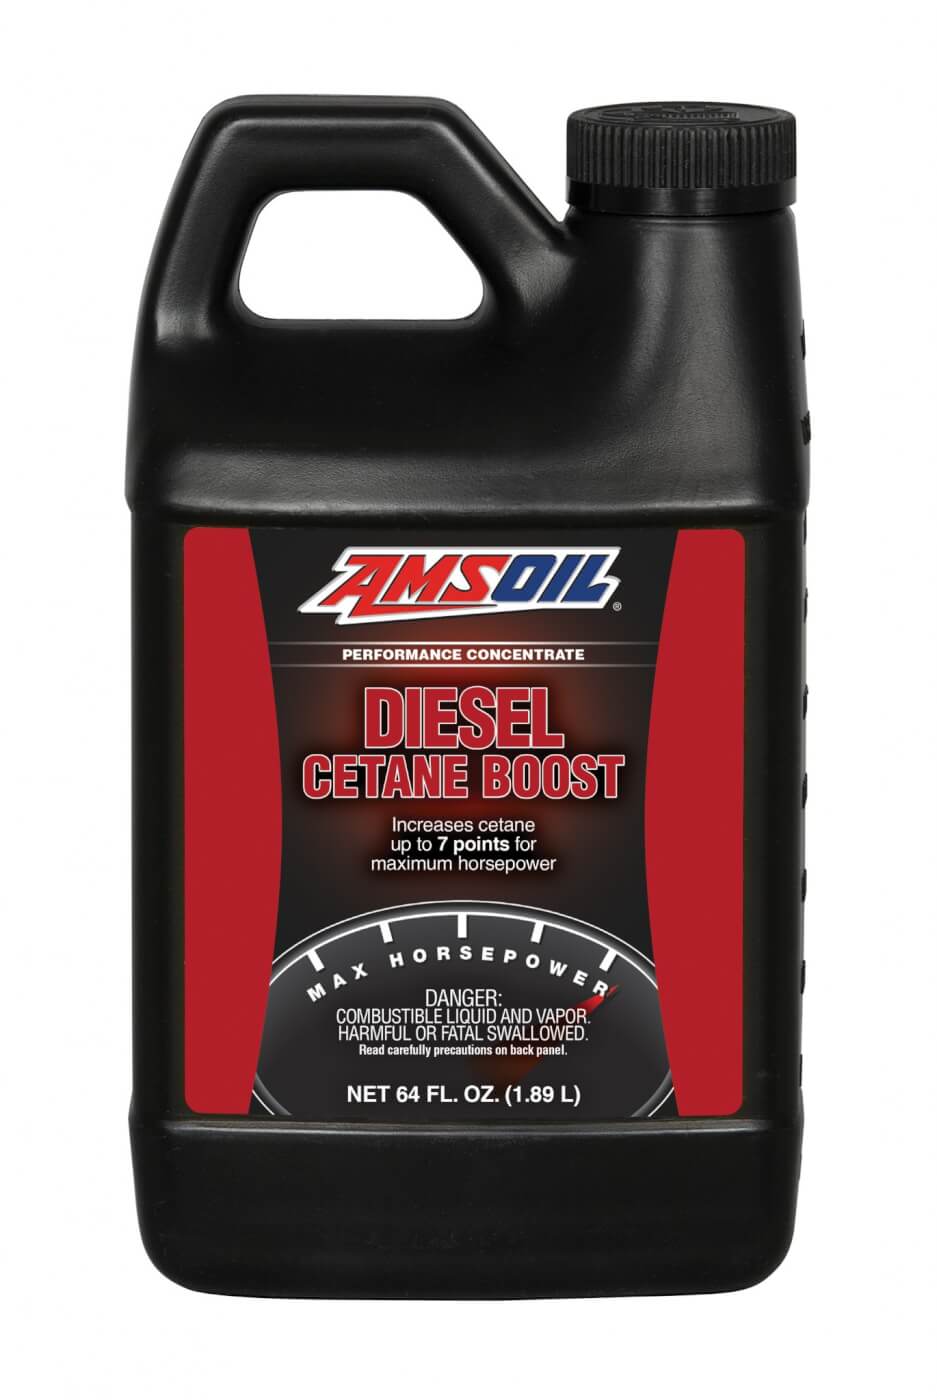 Amsoil Diesel Cetane Boost Now Offered In Half-Gallon Size